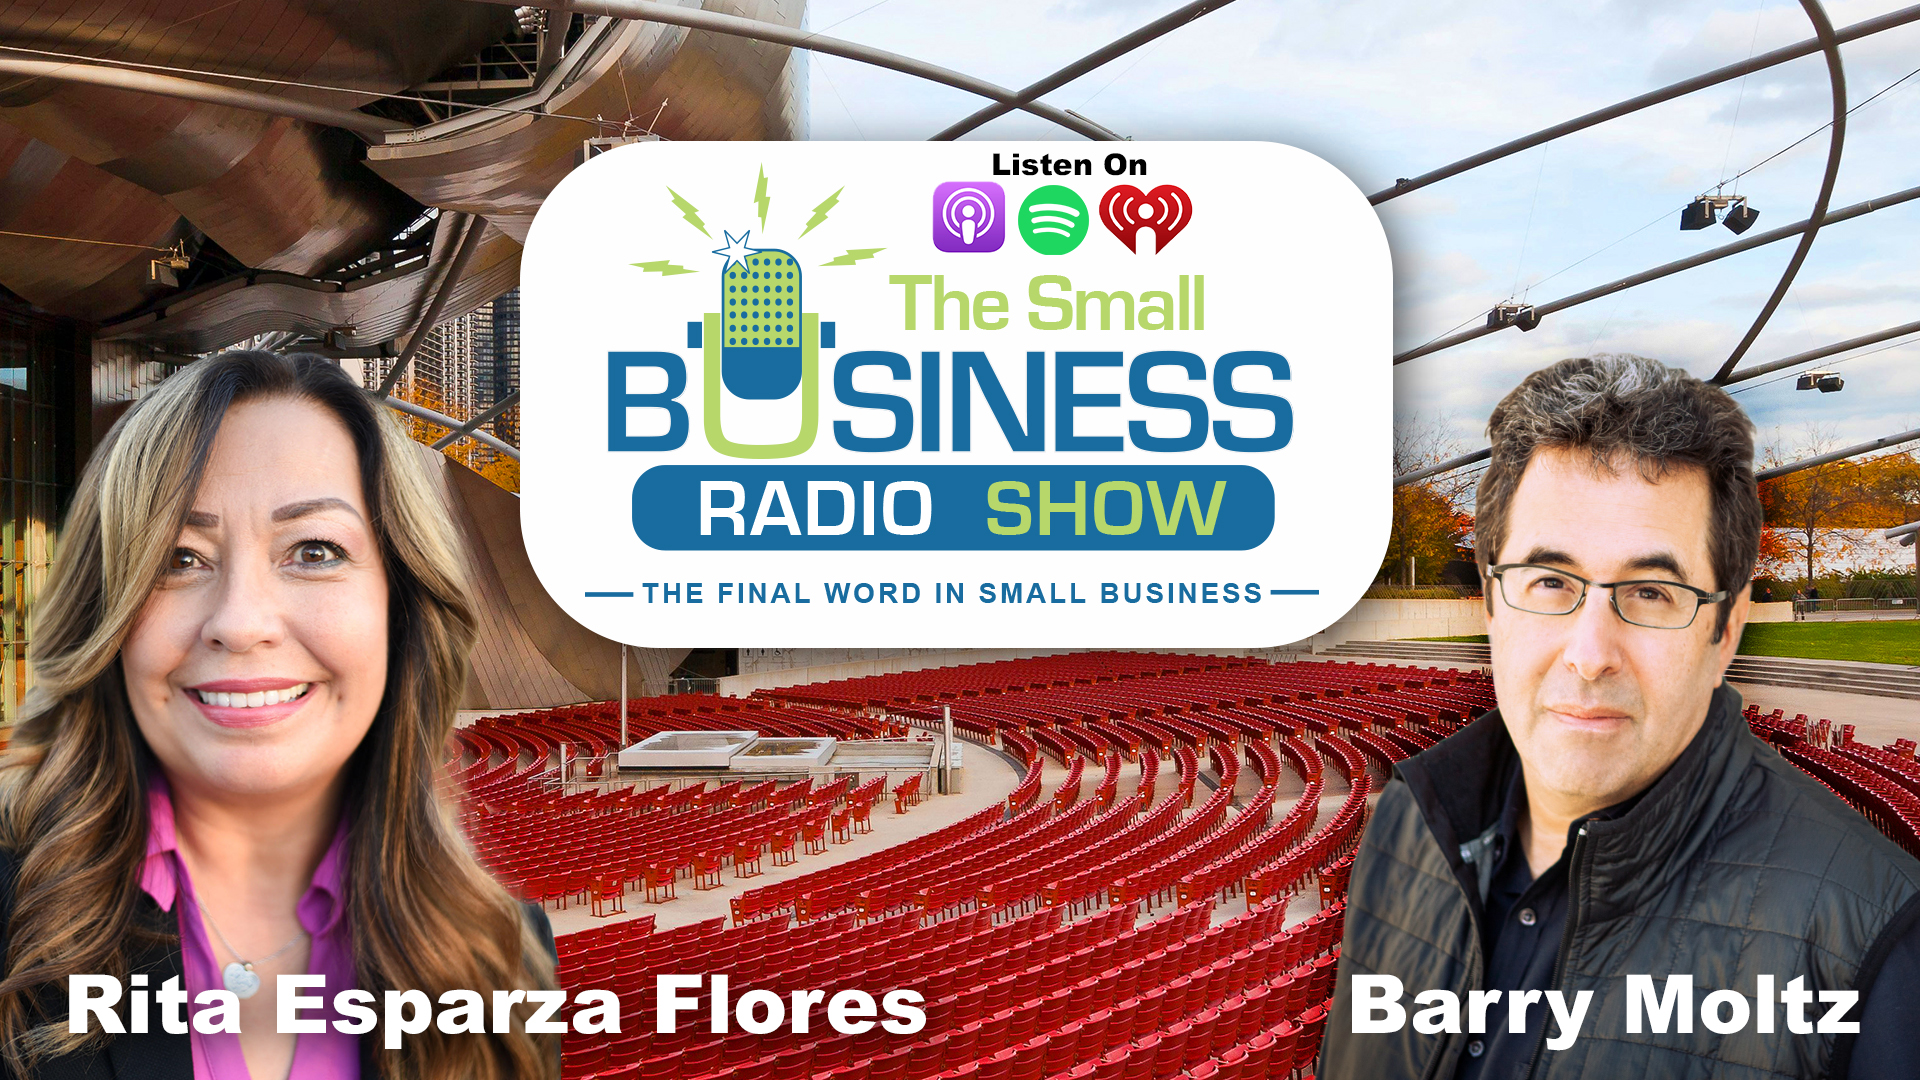 Rita Esparza Flores on The Small Business Radio Show AnswerConnect